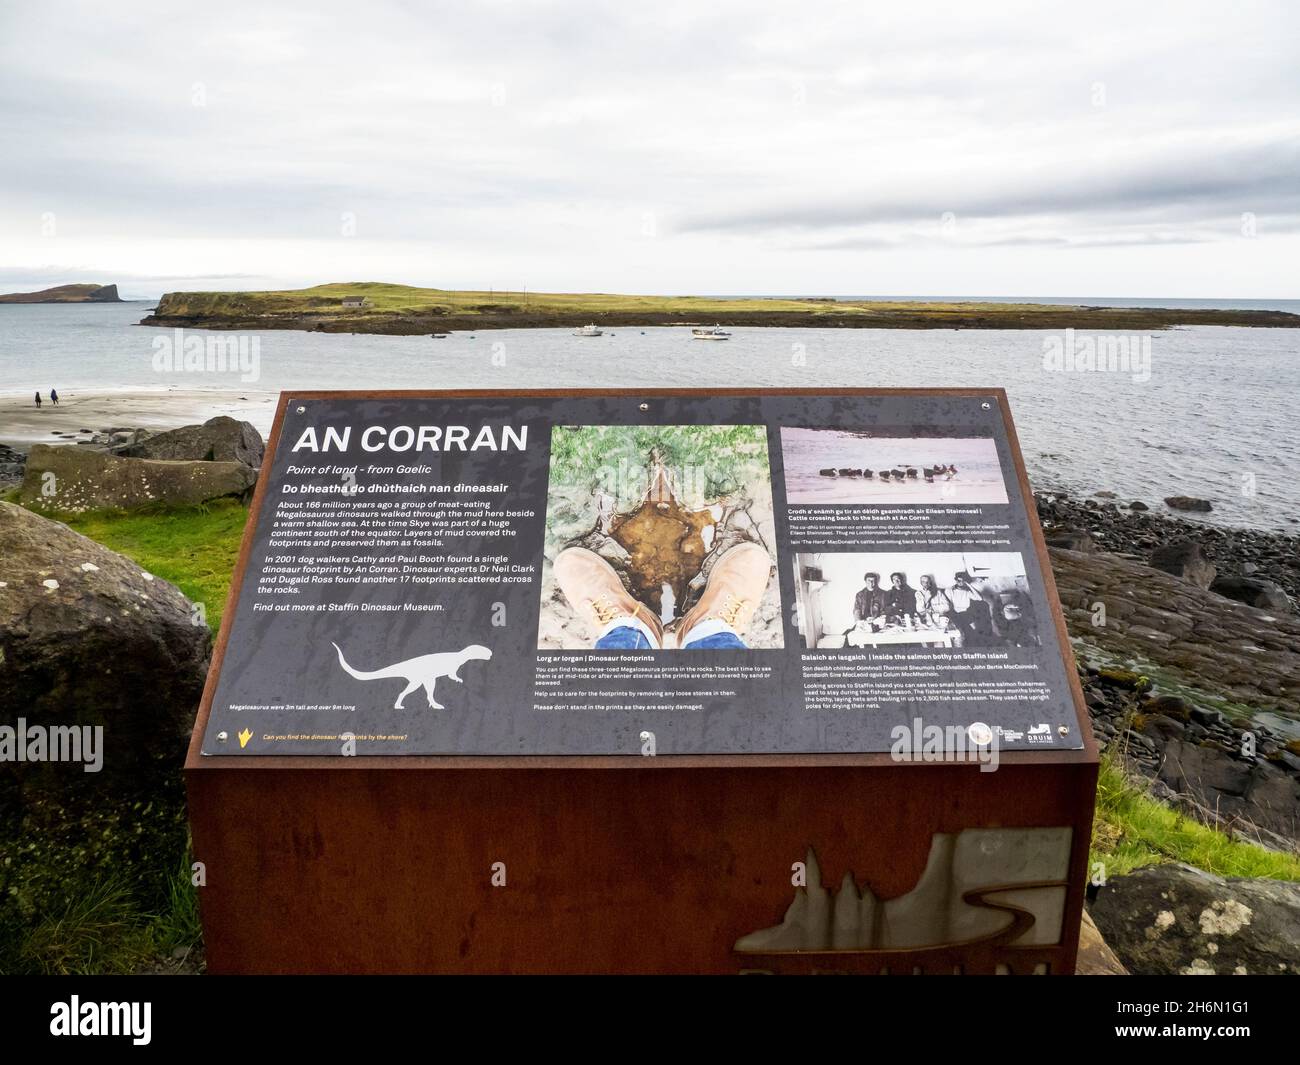 An information board at the site of a Sauropod dinosaur footprint at An Corran beach, Staffin, on the Isle of Skye, Scotland, UK. Stock Photo